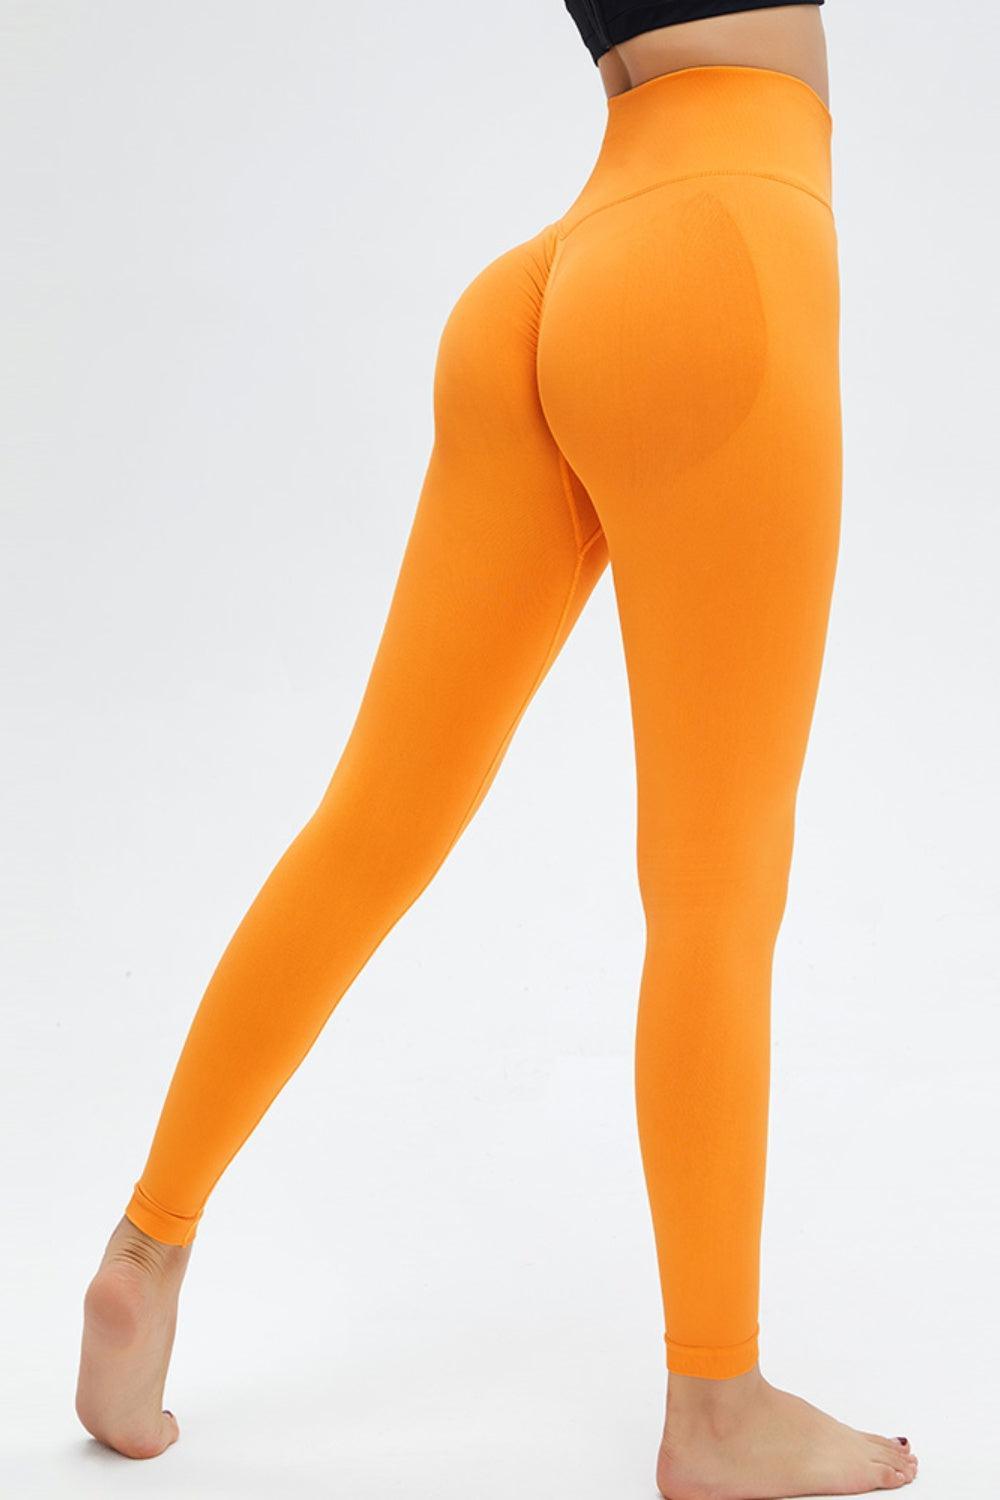 a woman in a black top and orange leggings